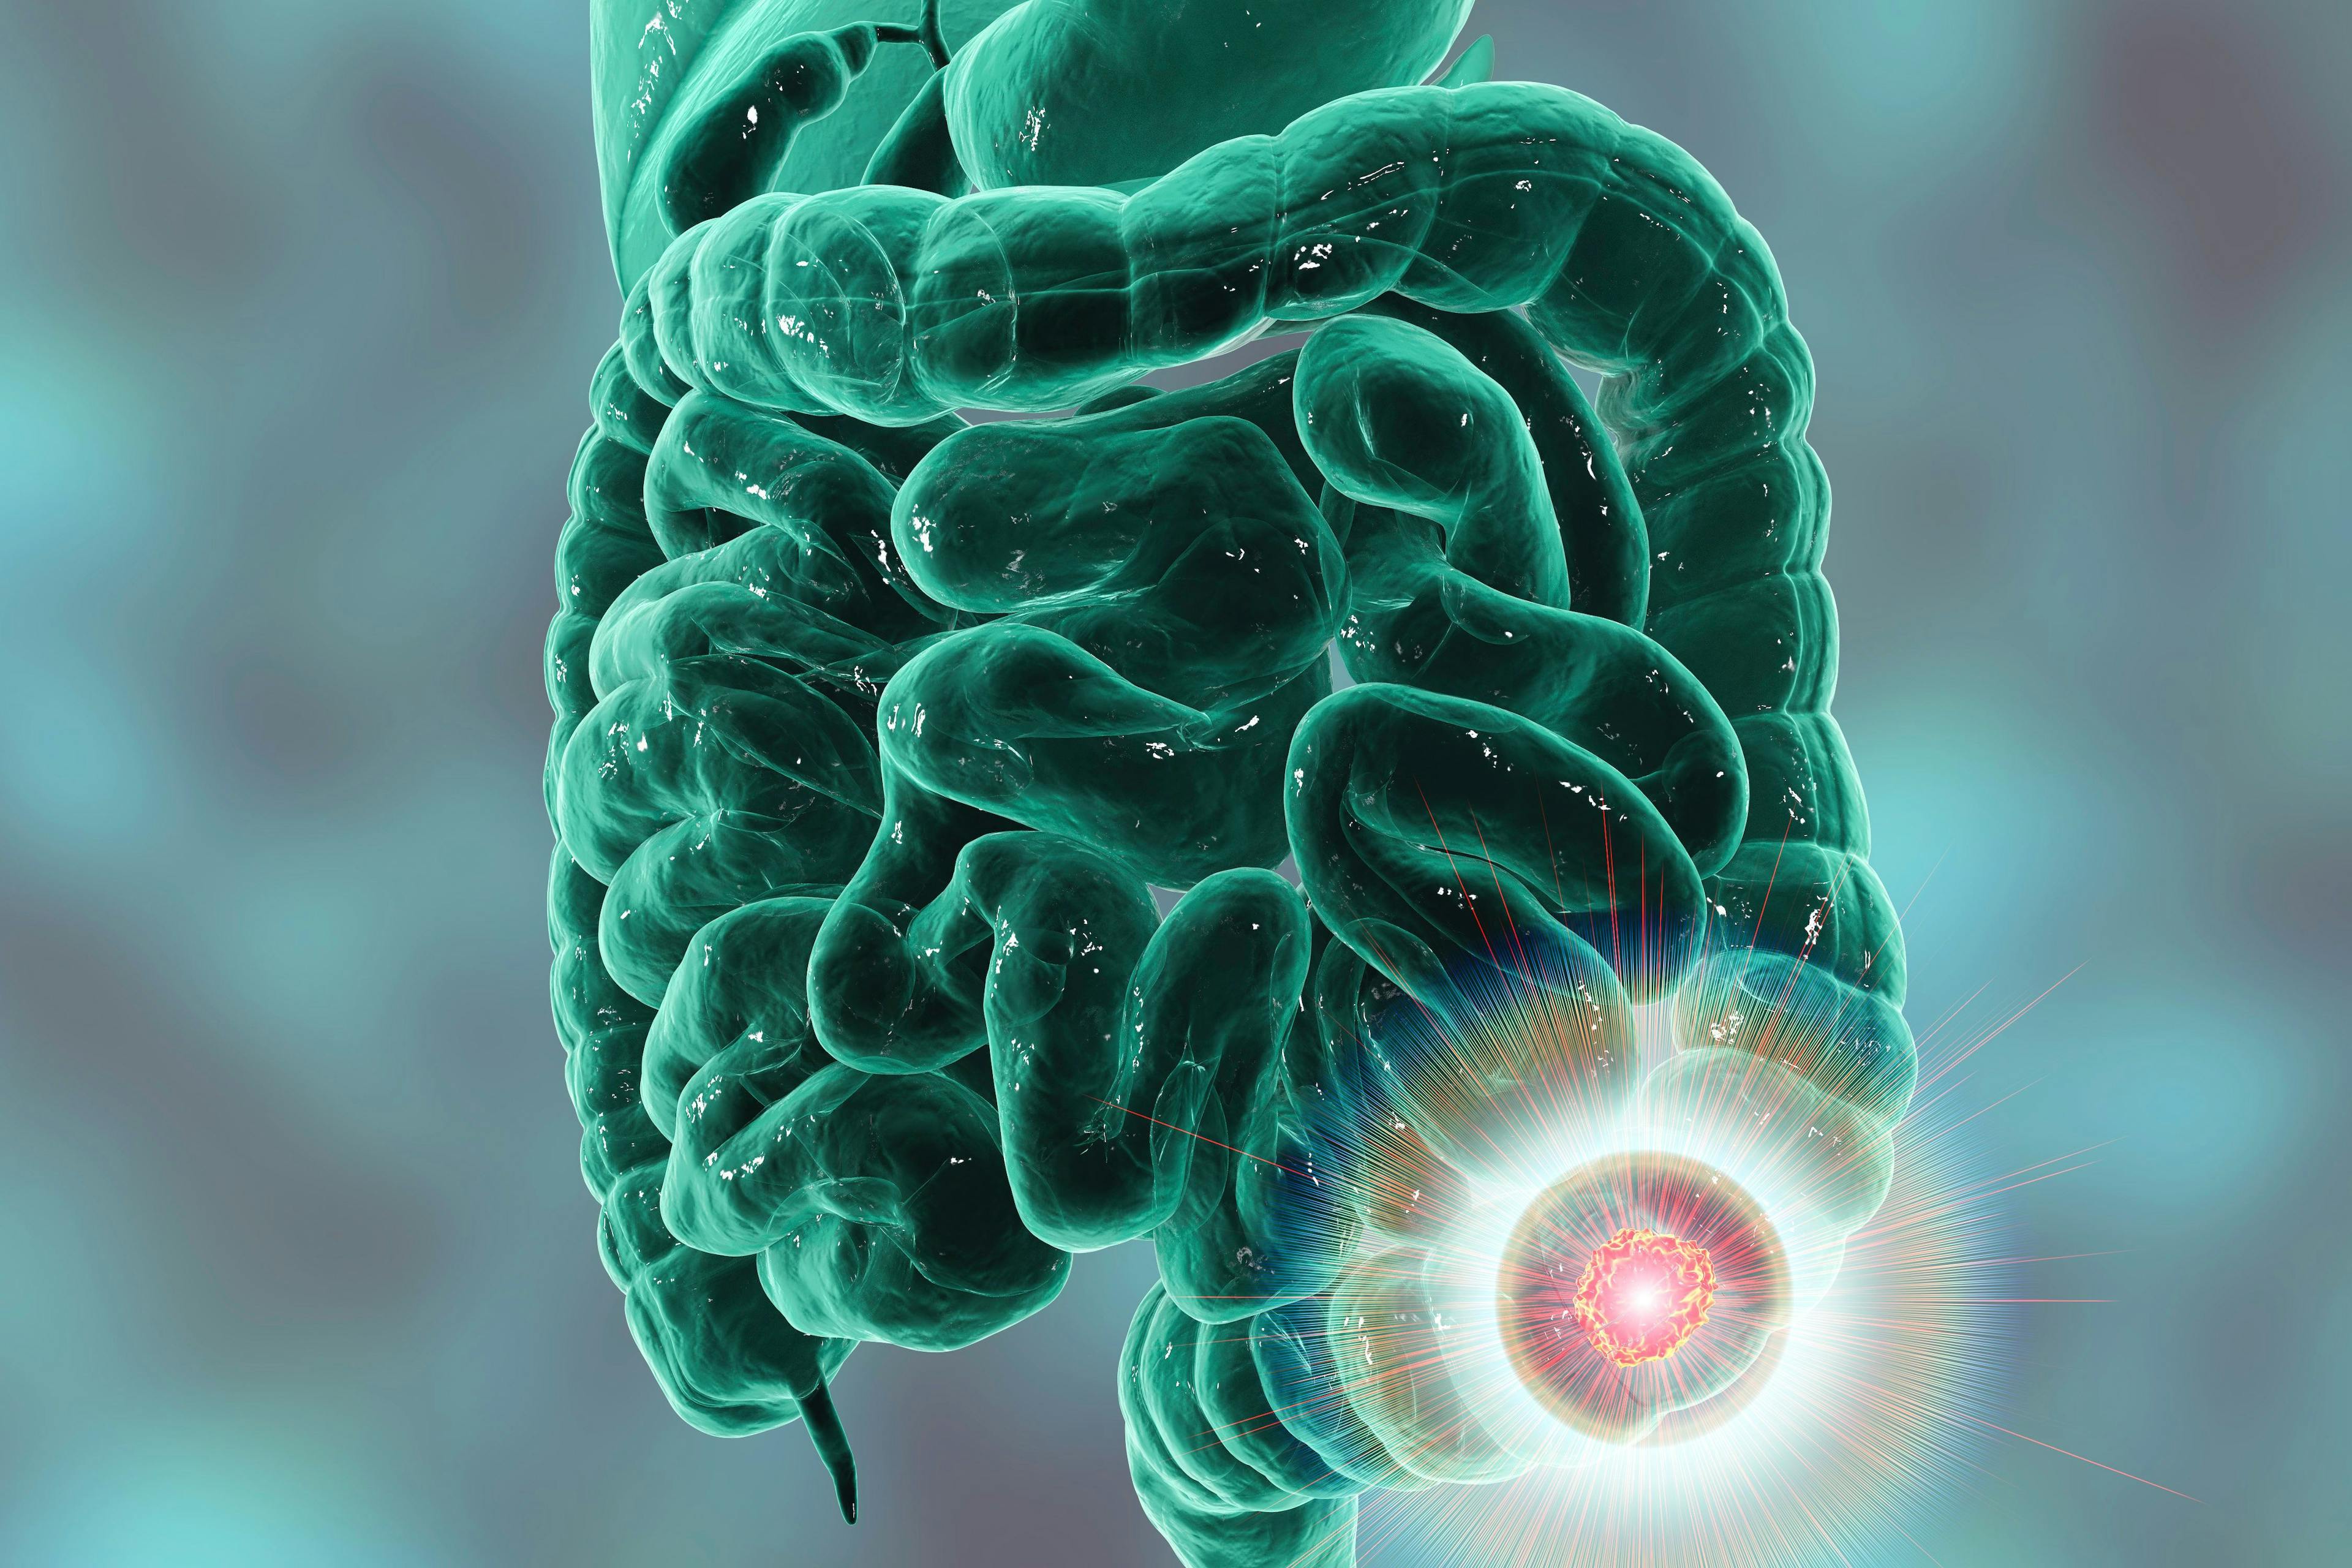 Colorectal cancer awareness medical concept. Concept of cancer treatment and prevention, 3D illustration | Image credit: Dr_Microbe - stock.adobe.com